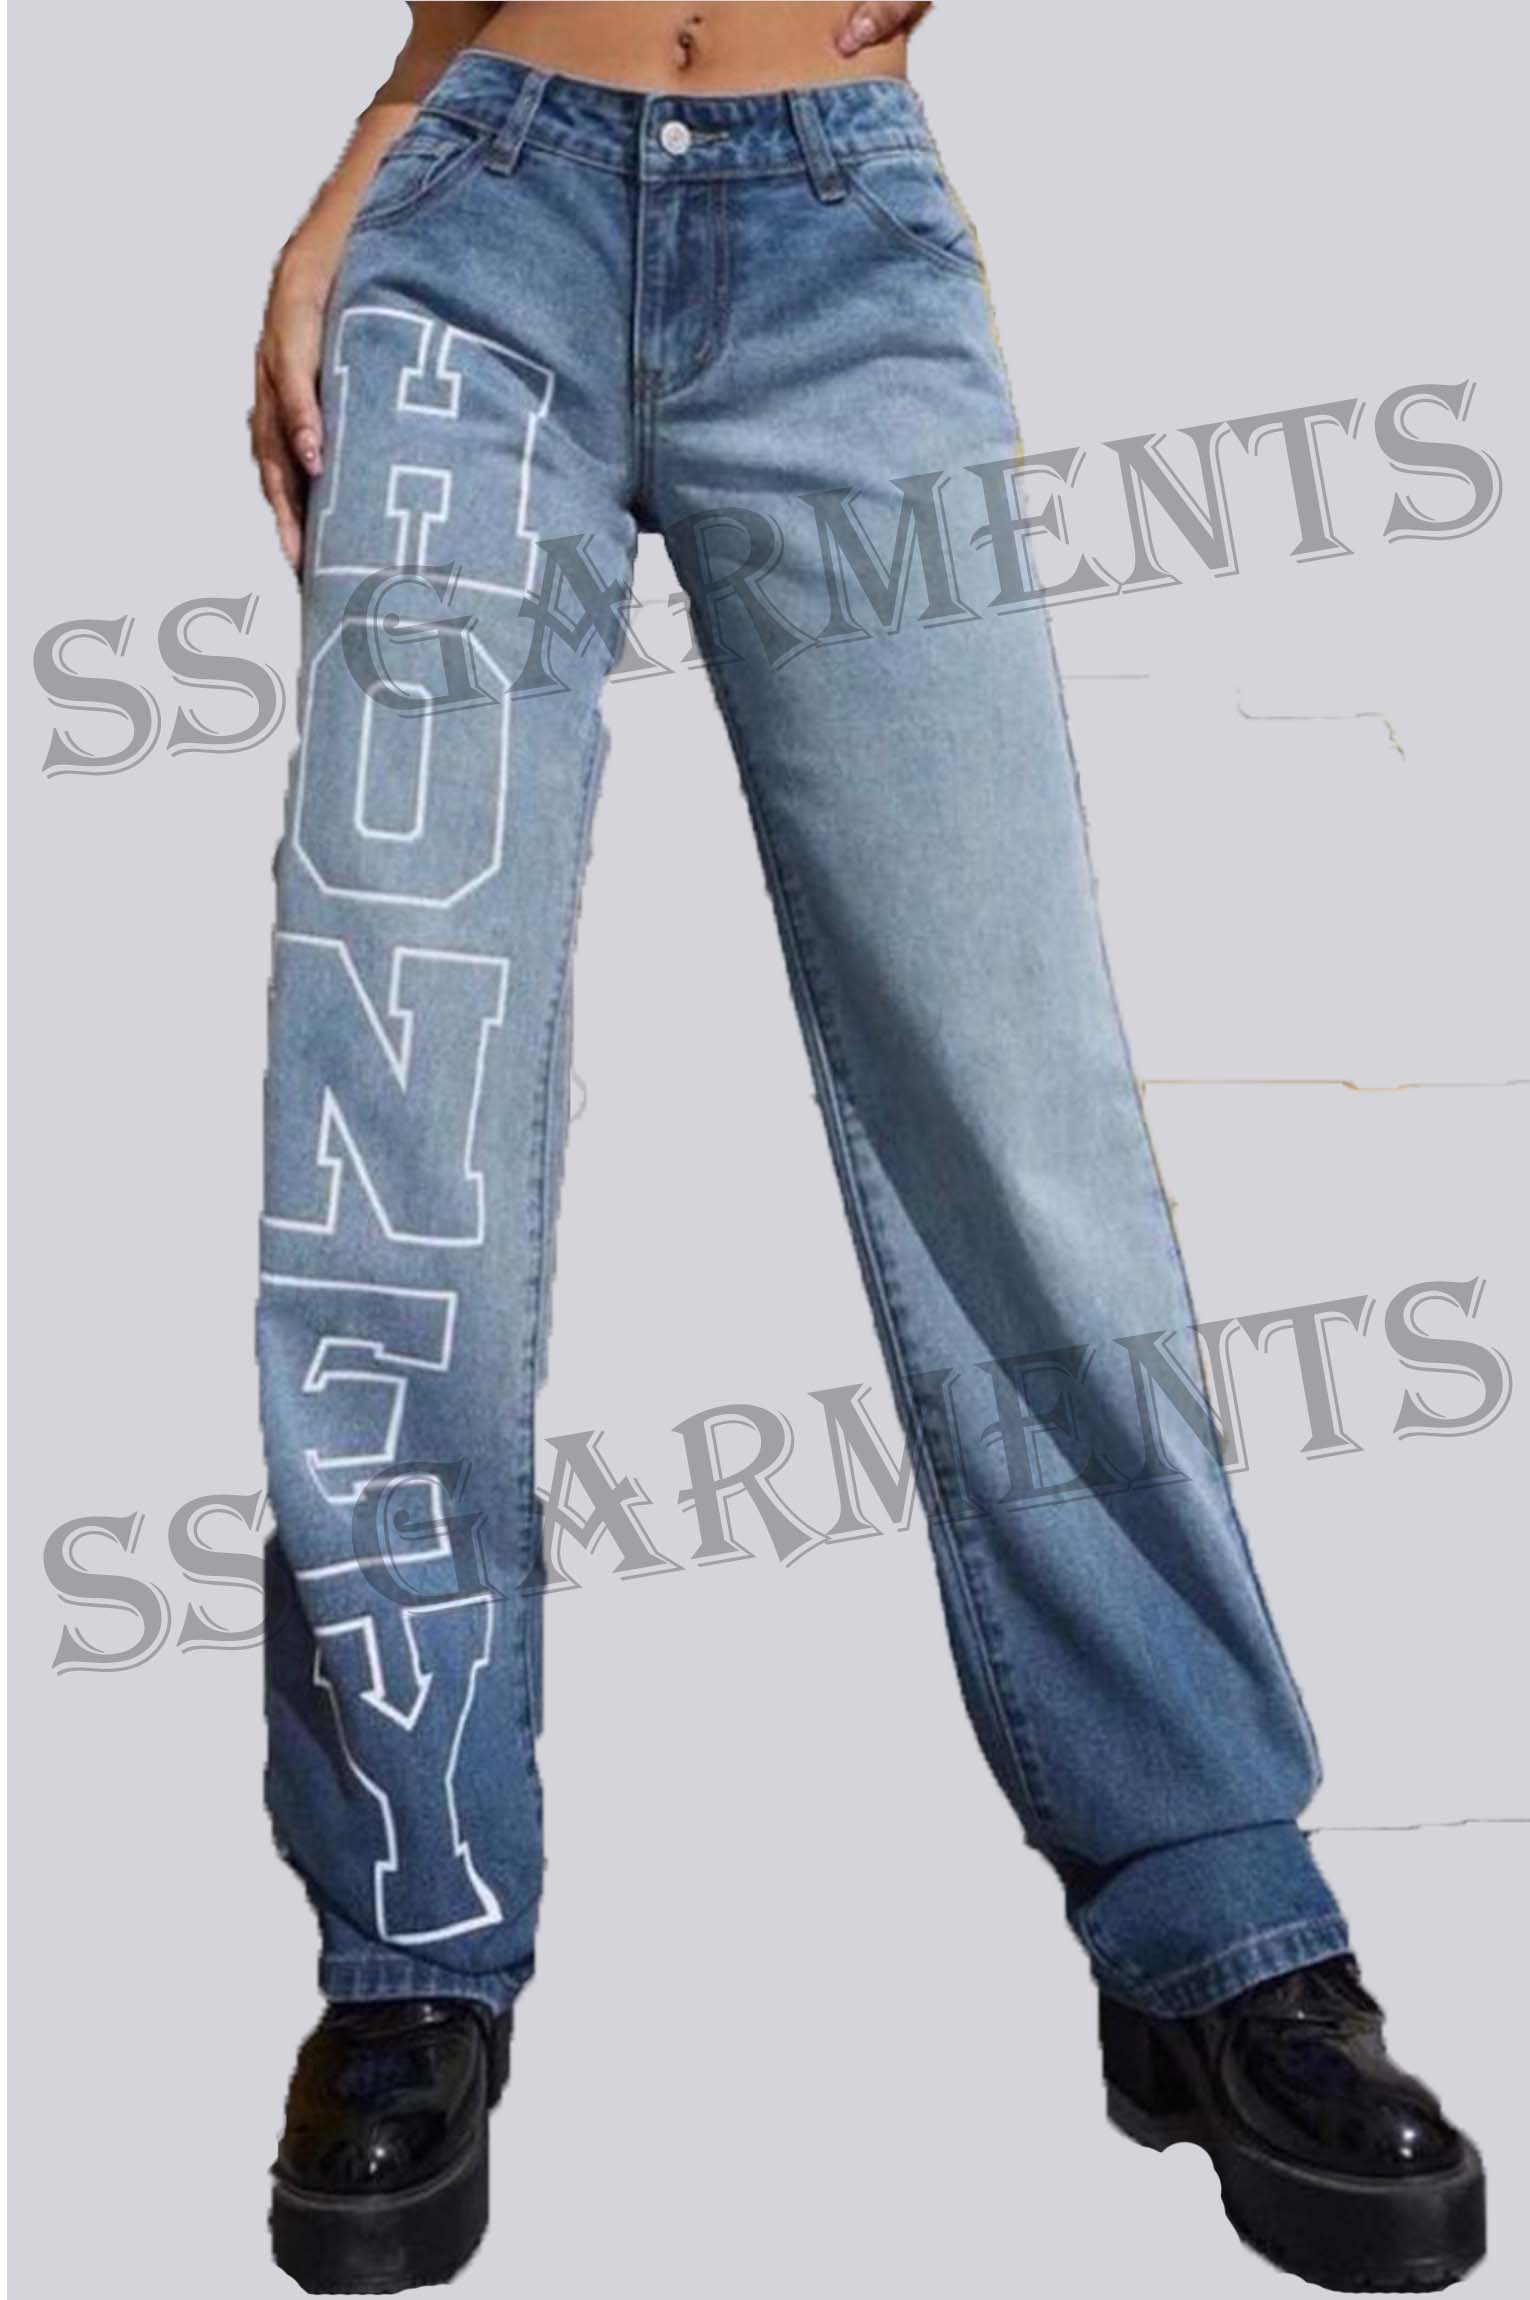 Honey Printed Denim Jeans with Cotton and Nylon Soft Fabric